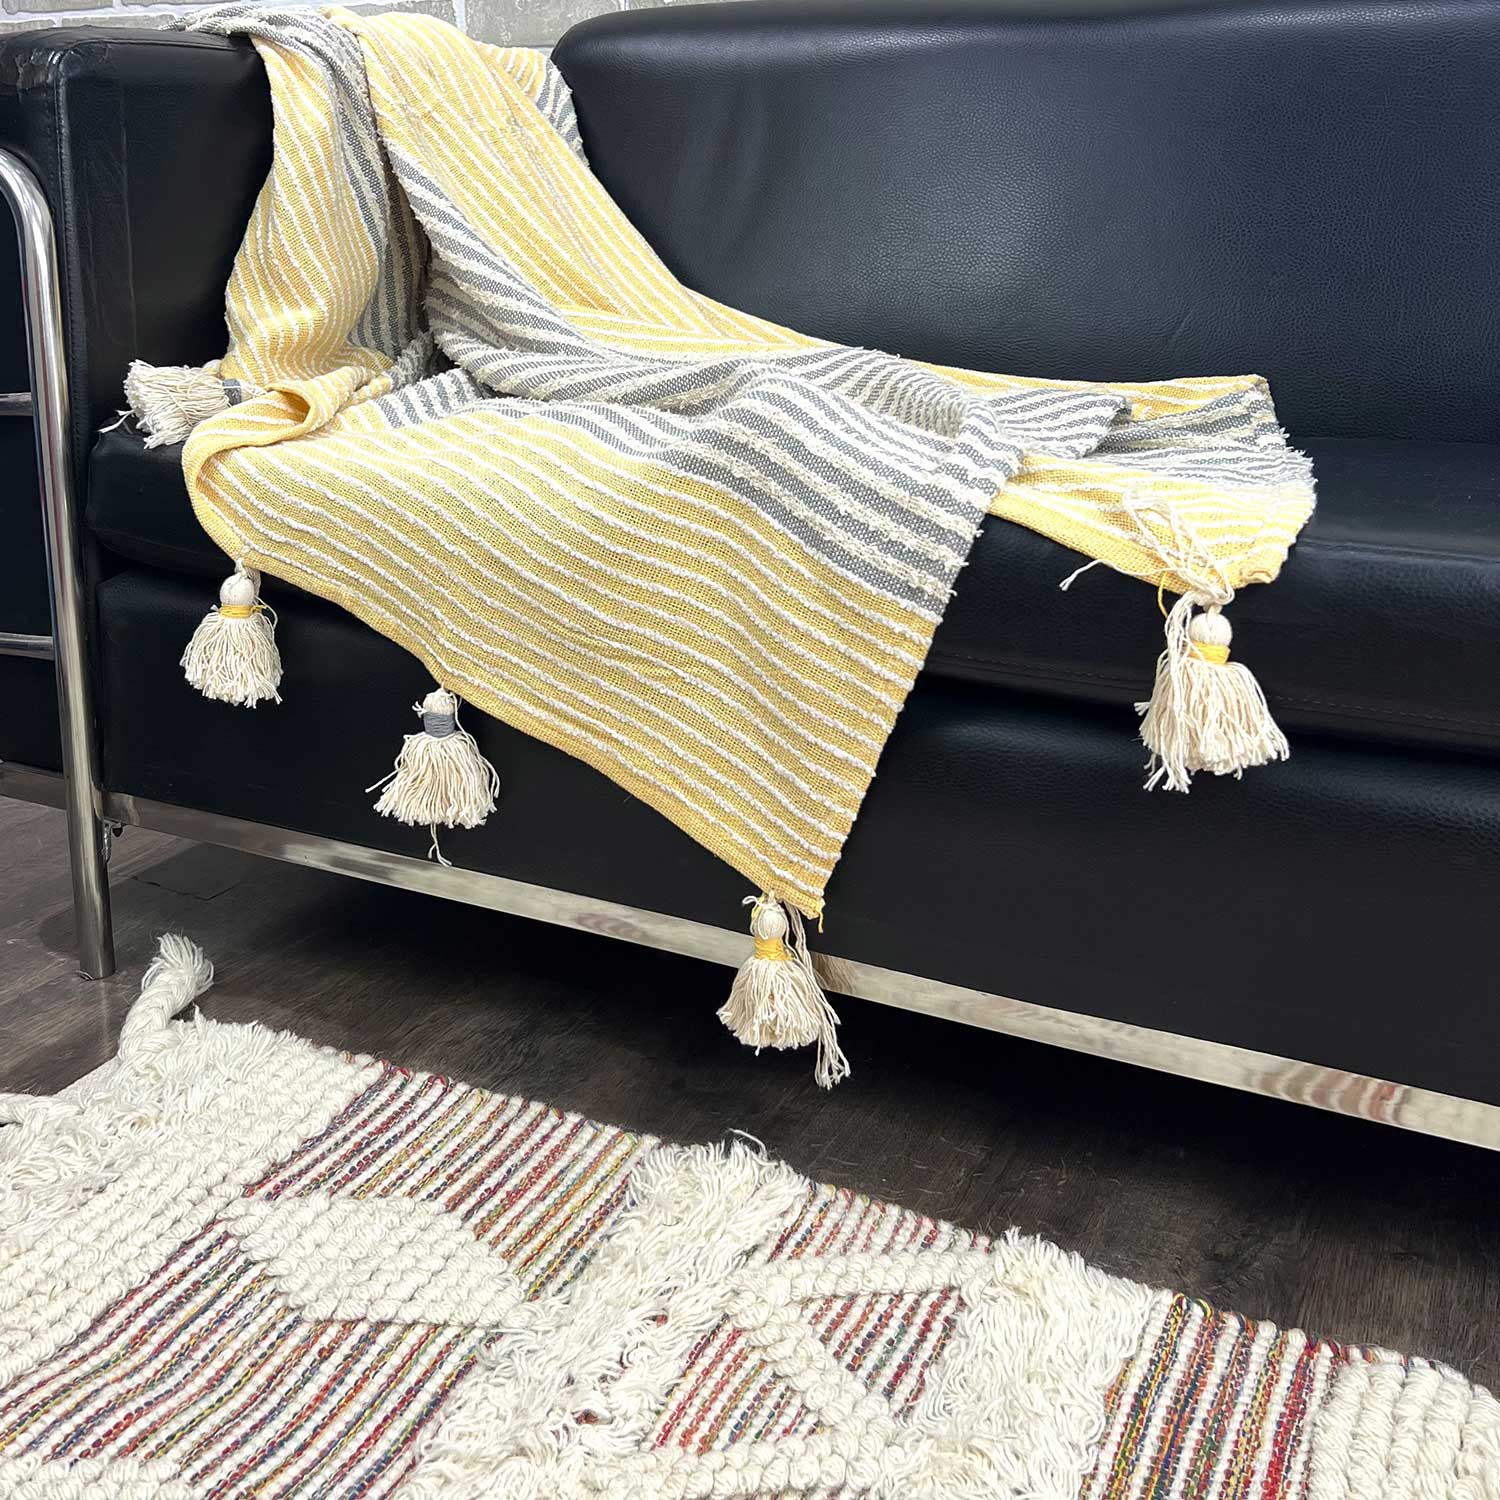 Yellow & Blue Cotton Throw with Tassels 1 54 inches x 68 inches